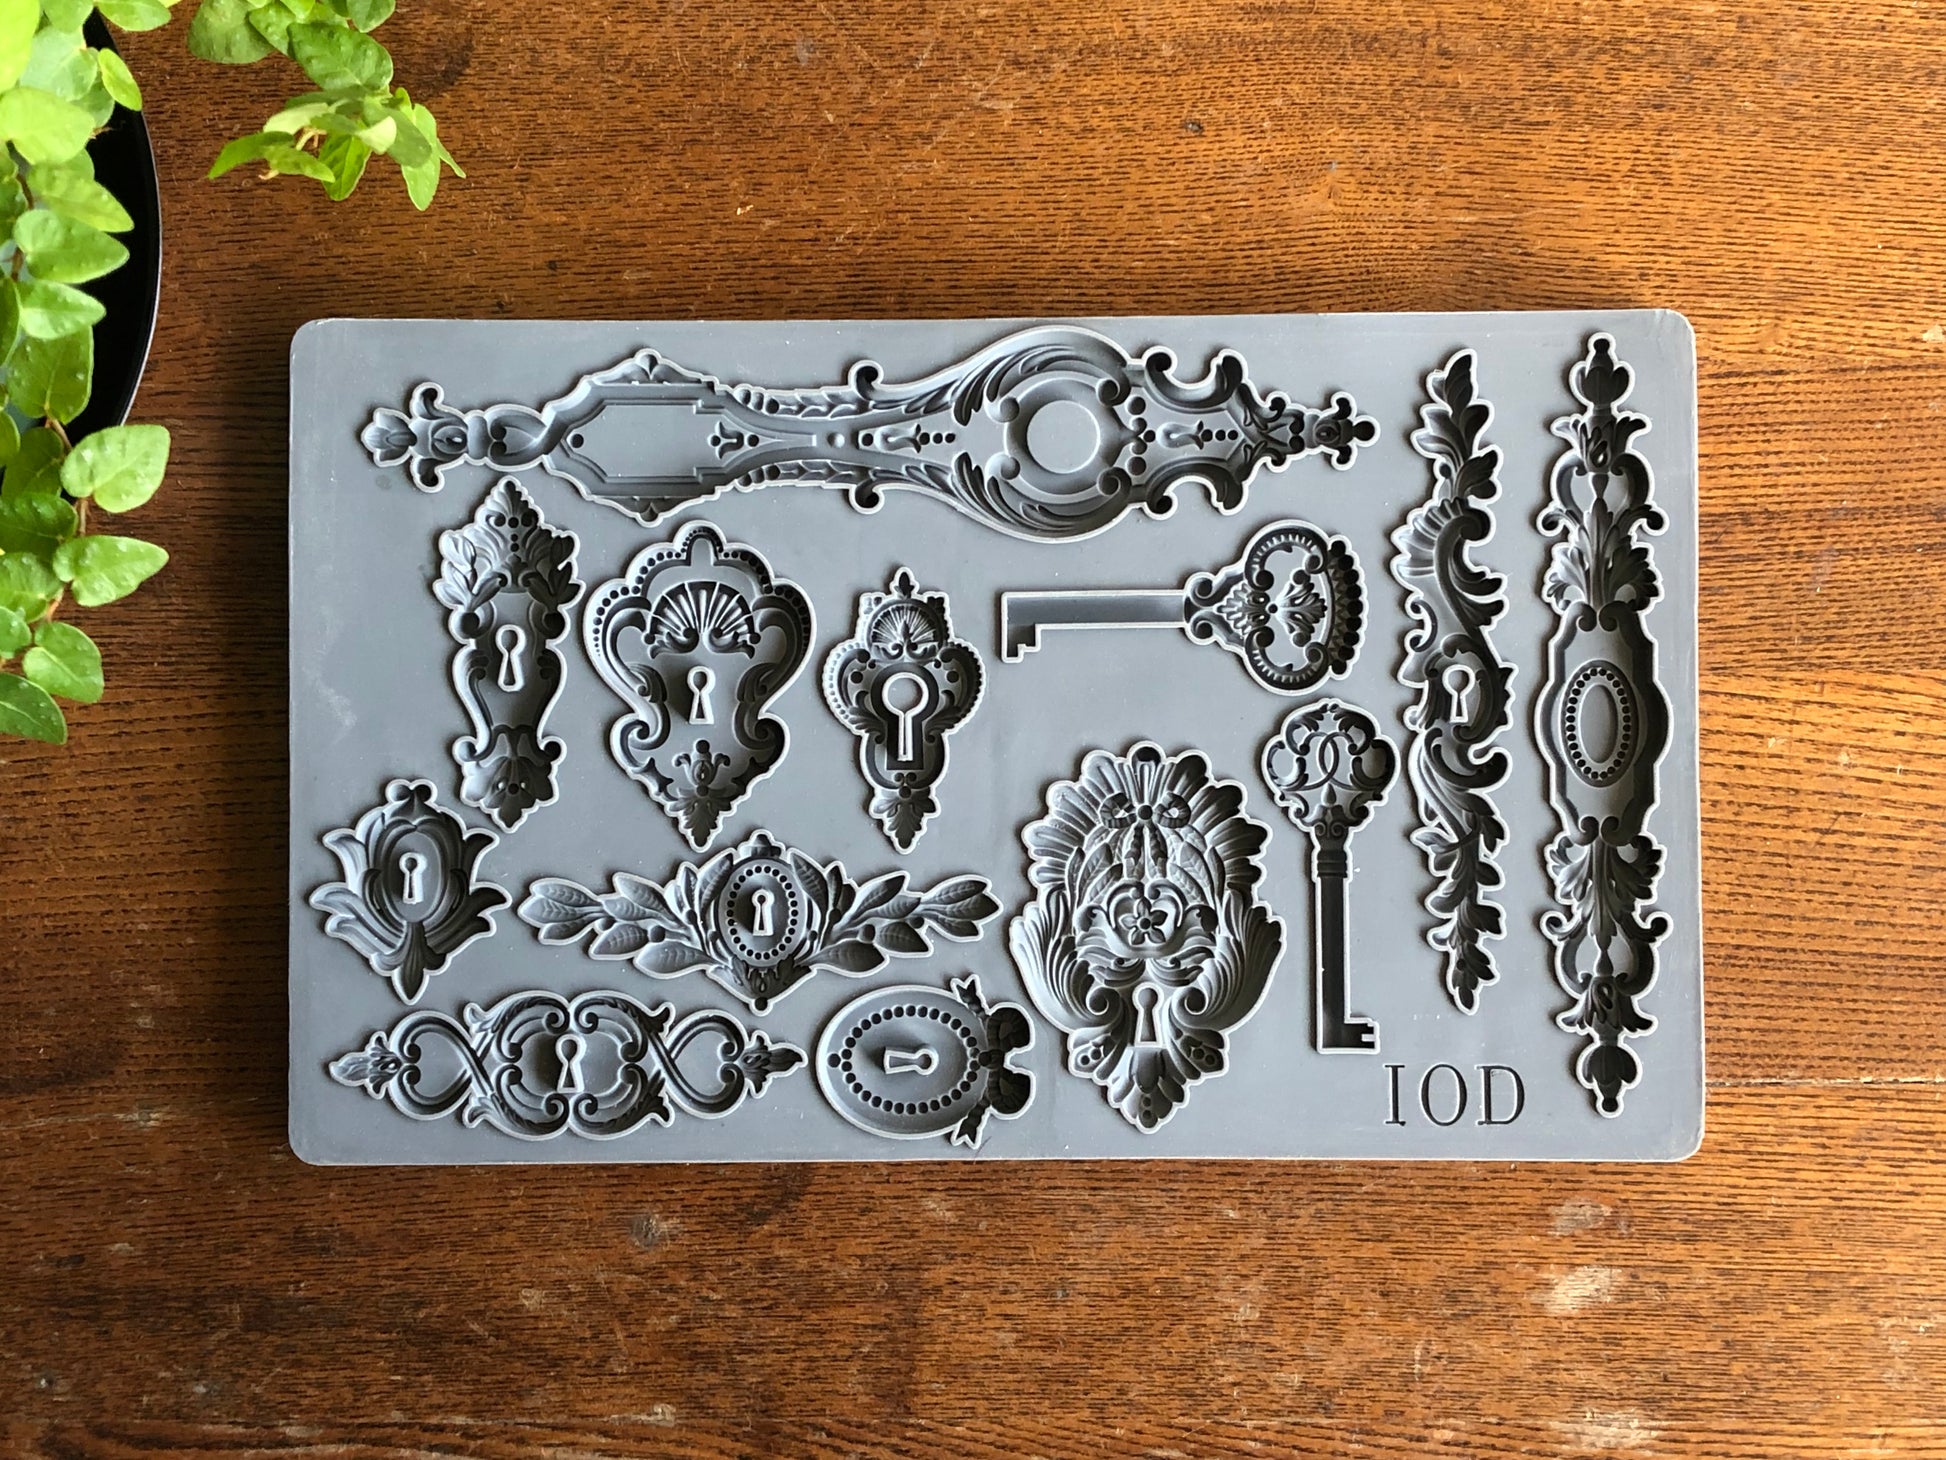 Frames IOD Iron Orchid Designs Silicone Mould Proprietary Micro Rim. For  home decor and furniture DIY projects